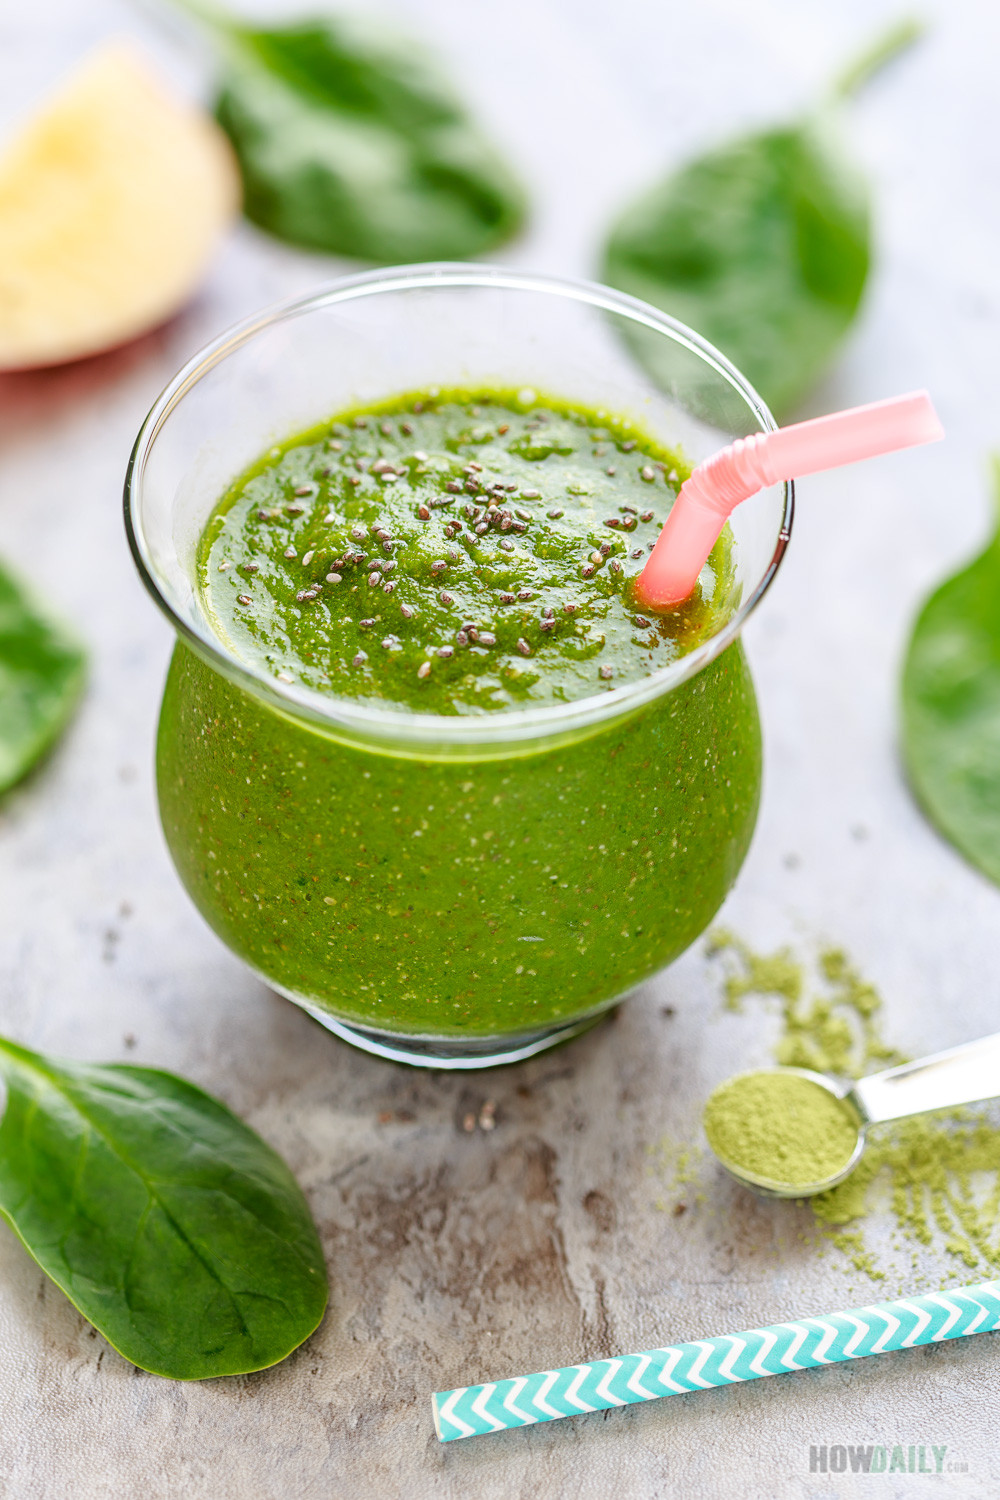 Healthy Smoothie Recipes With Spinach
 Matcha Green Tea Apple Smoothie with Spinach Recipe